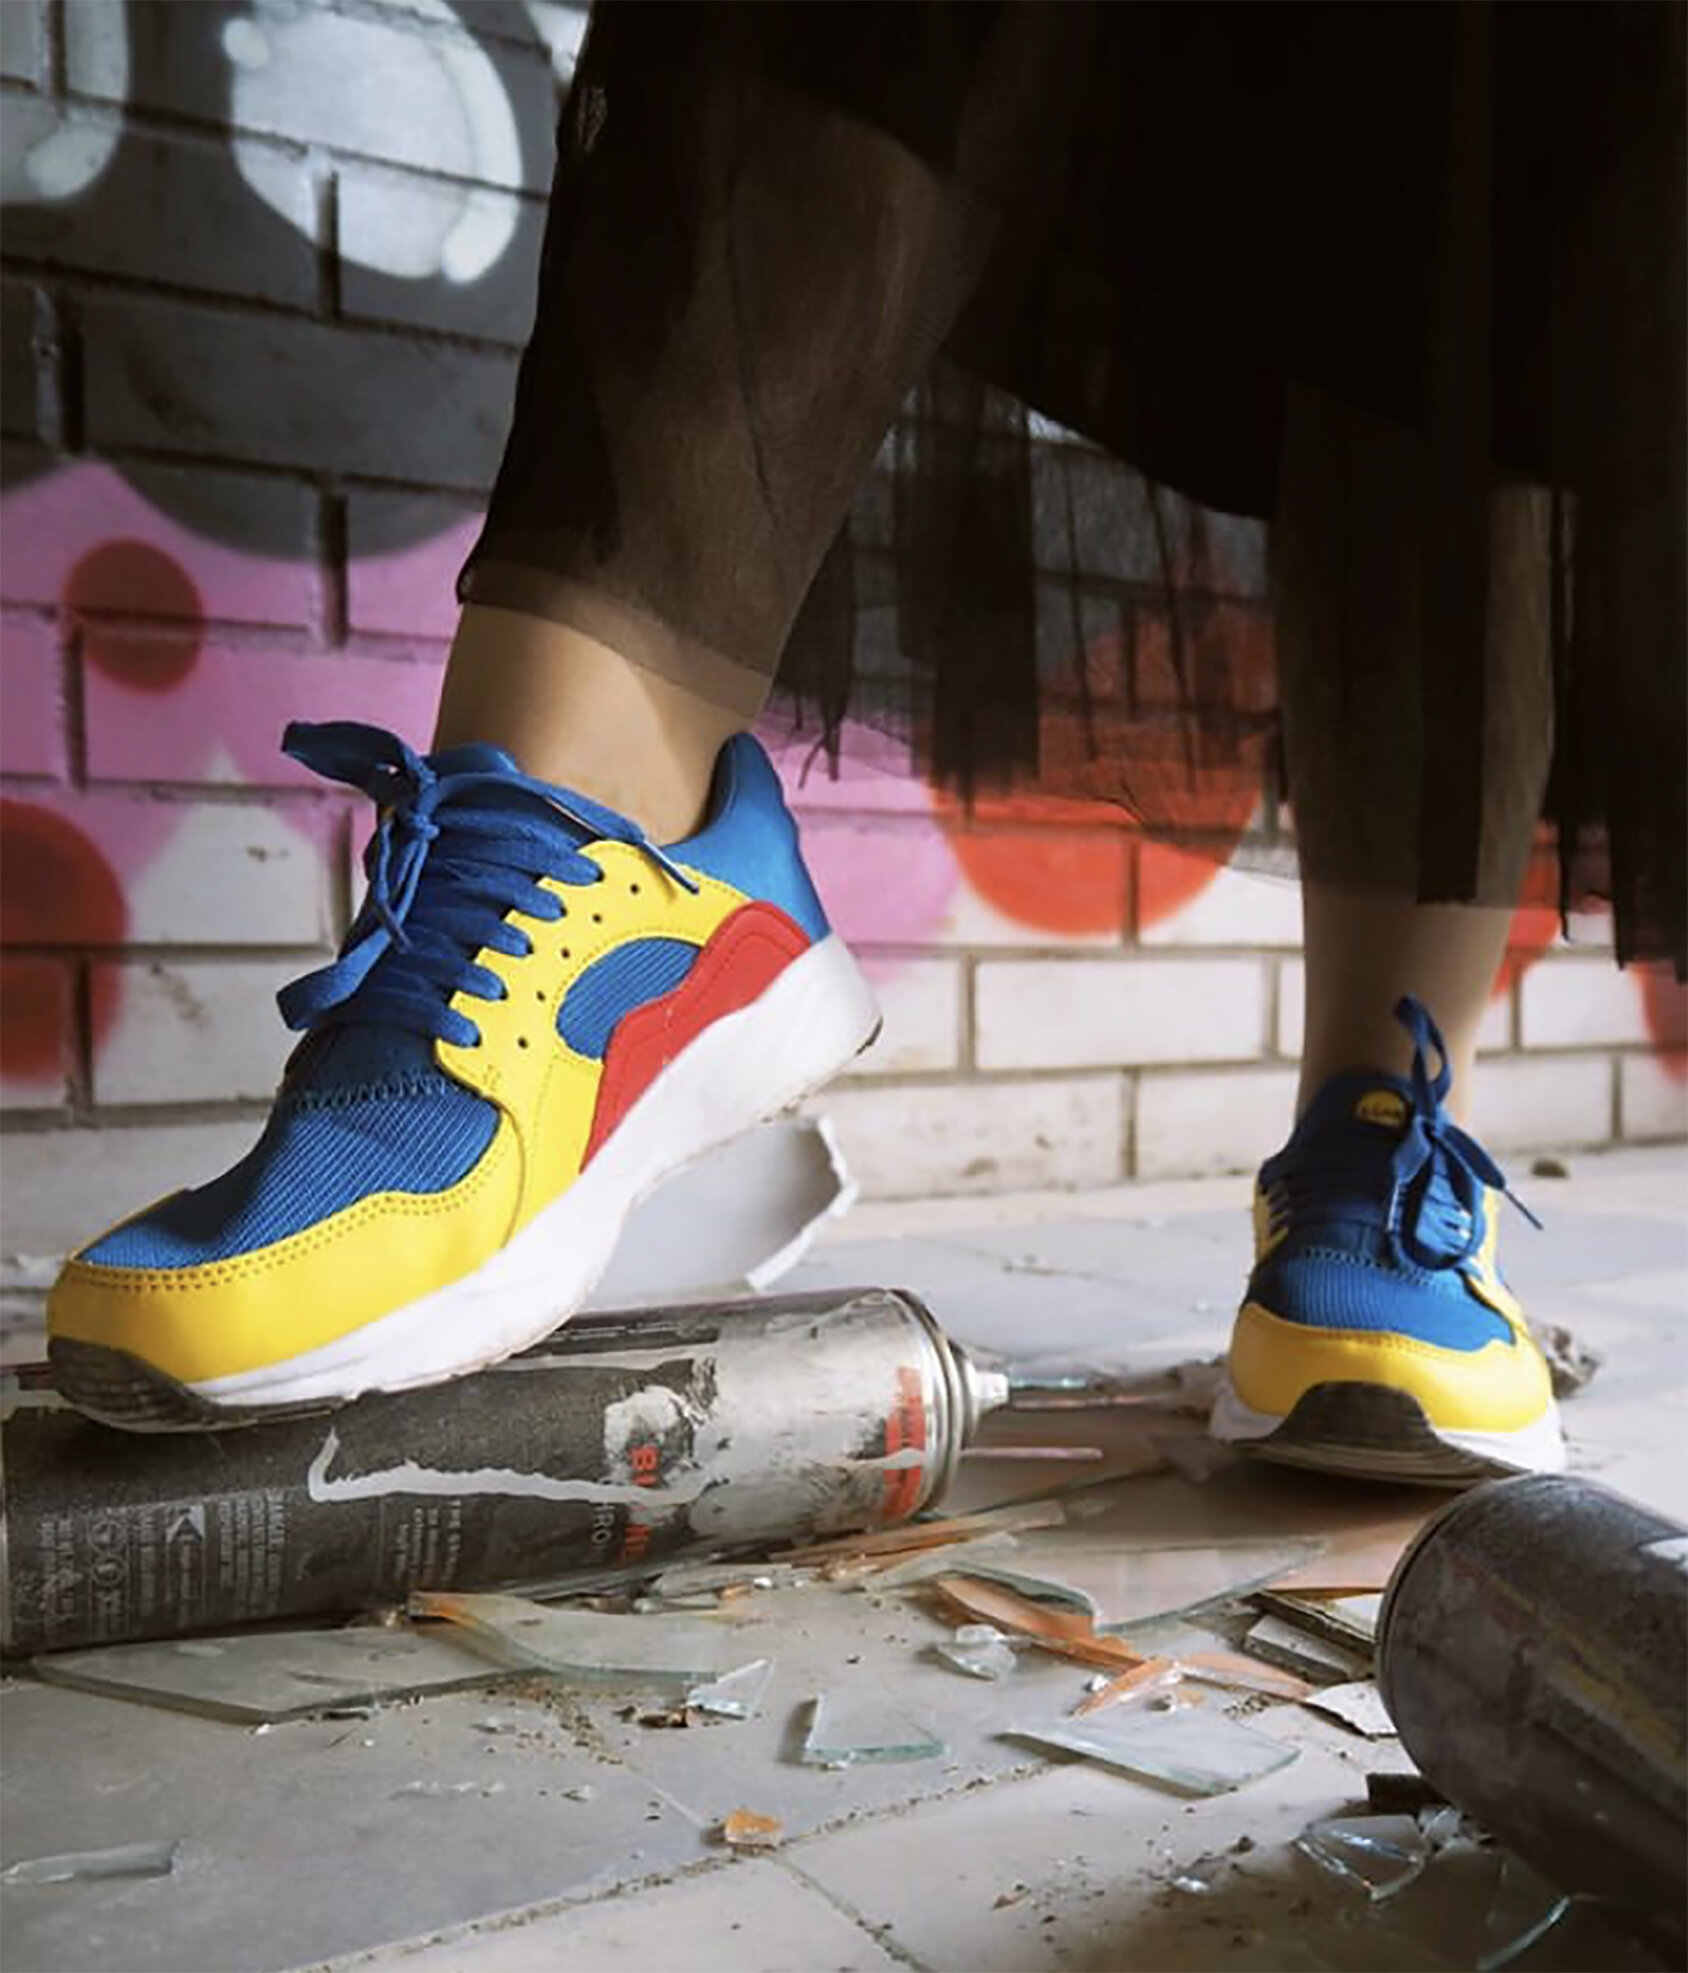 14 Lidl trainers flood Ebay selling for up to £450 - Latest Retail  Technology News From Across The Globe - Charged